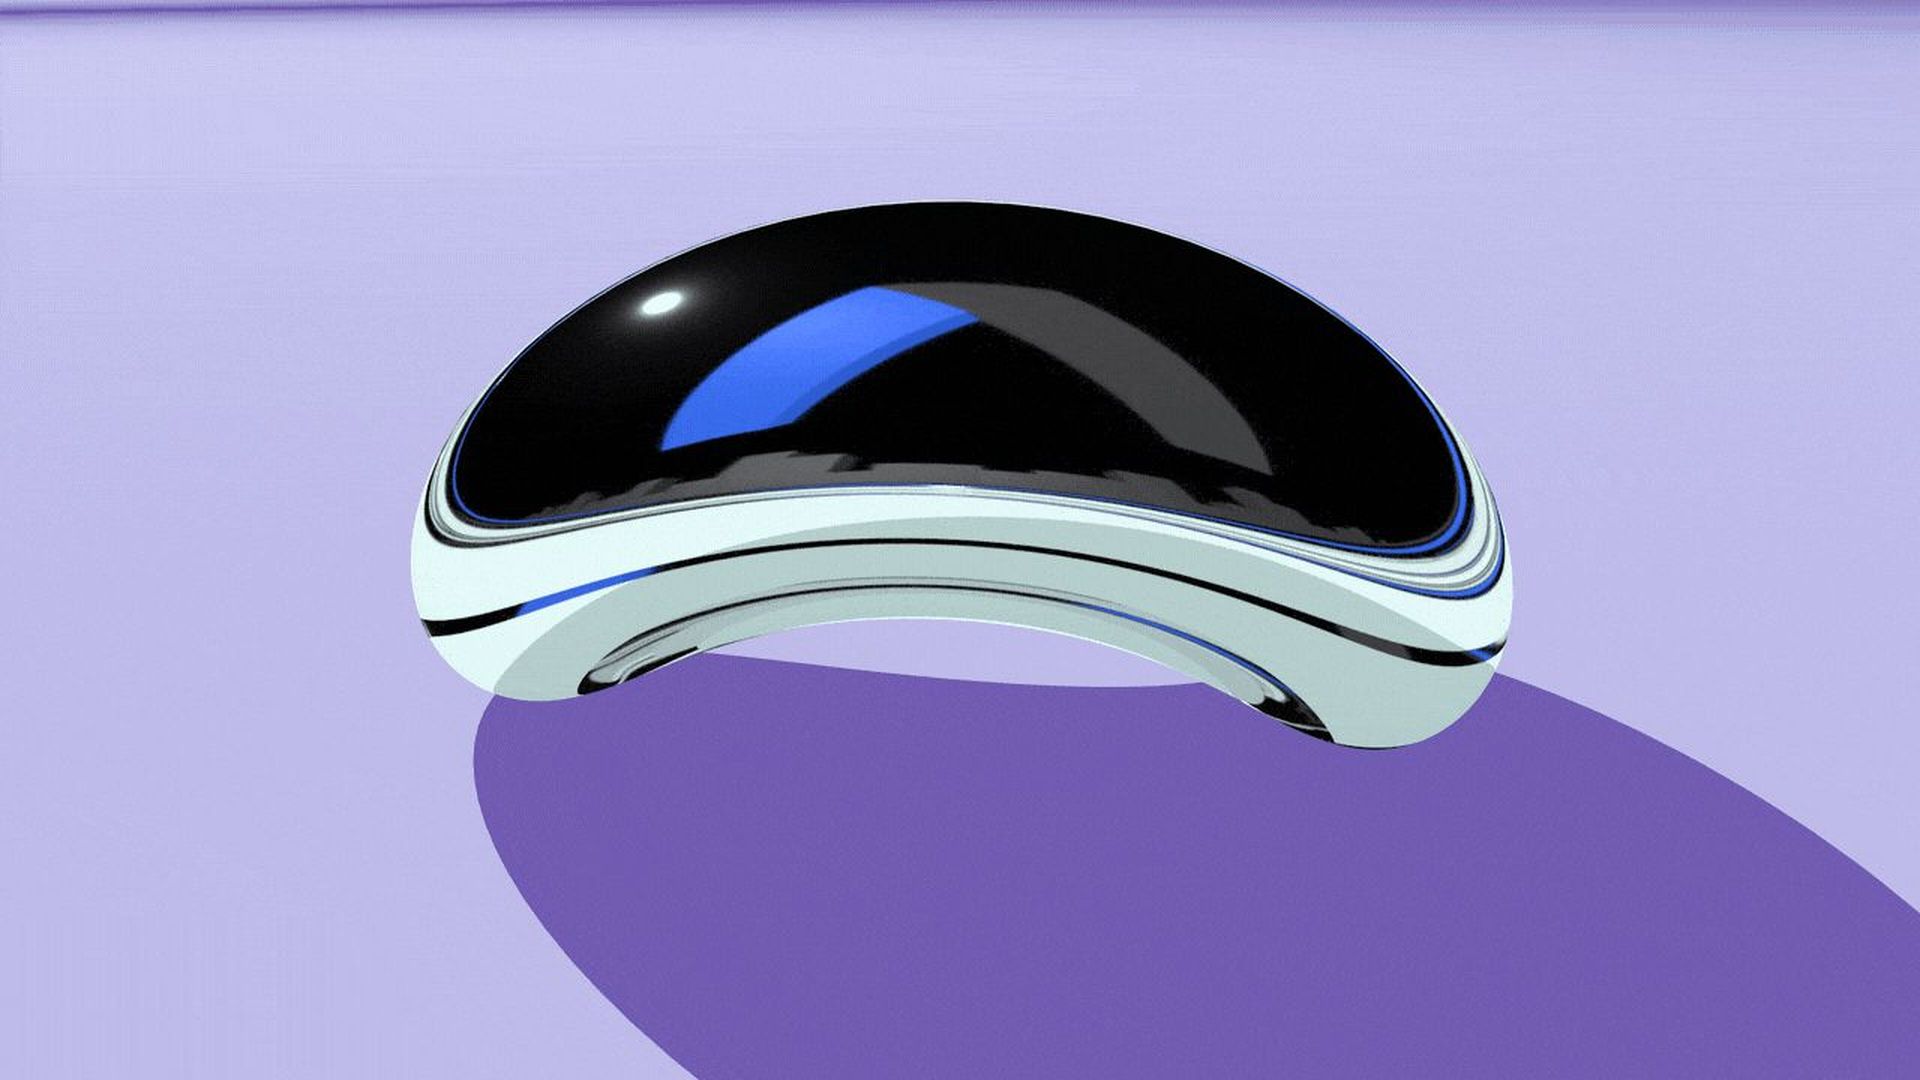 Illustration of the Chicago Cloud Gate bean sculpture reflecting the Axios logo.